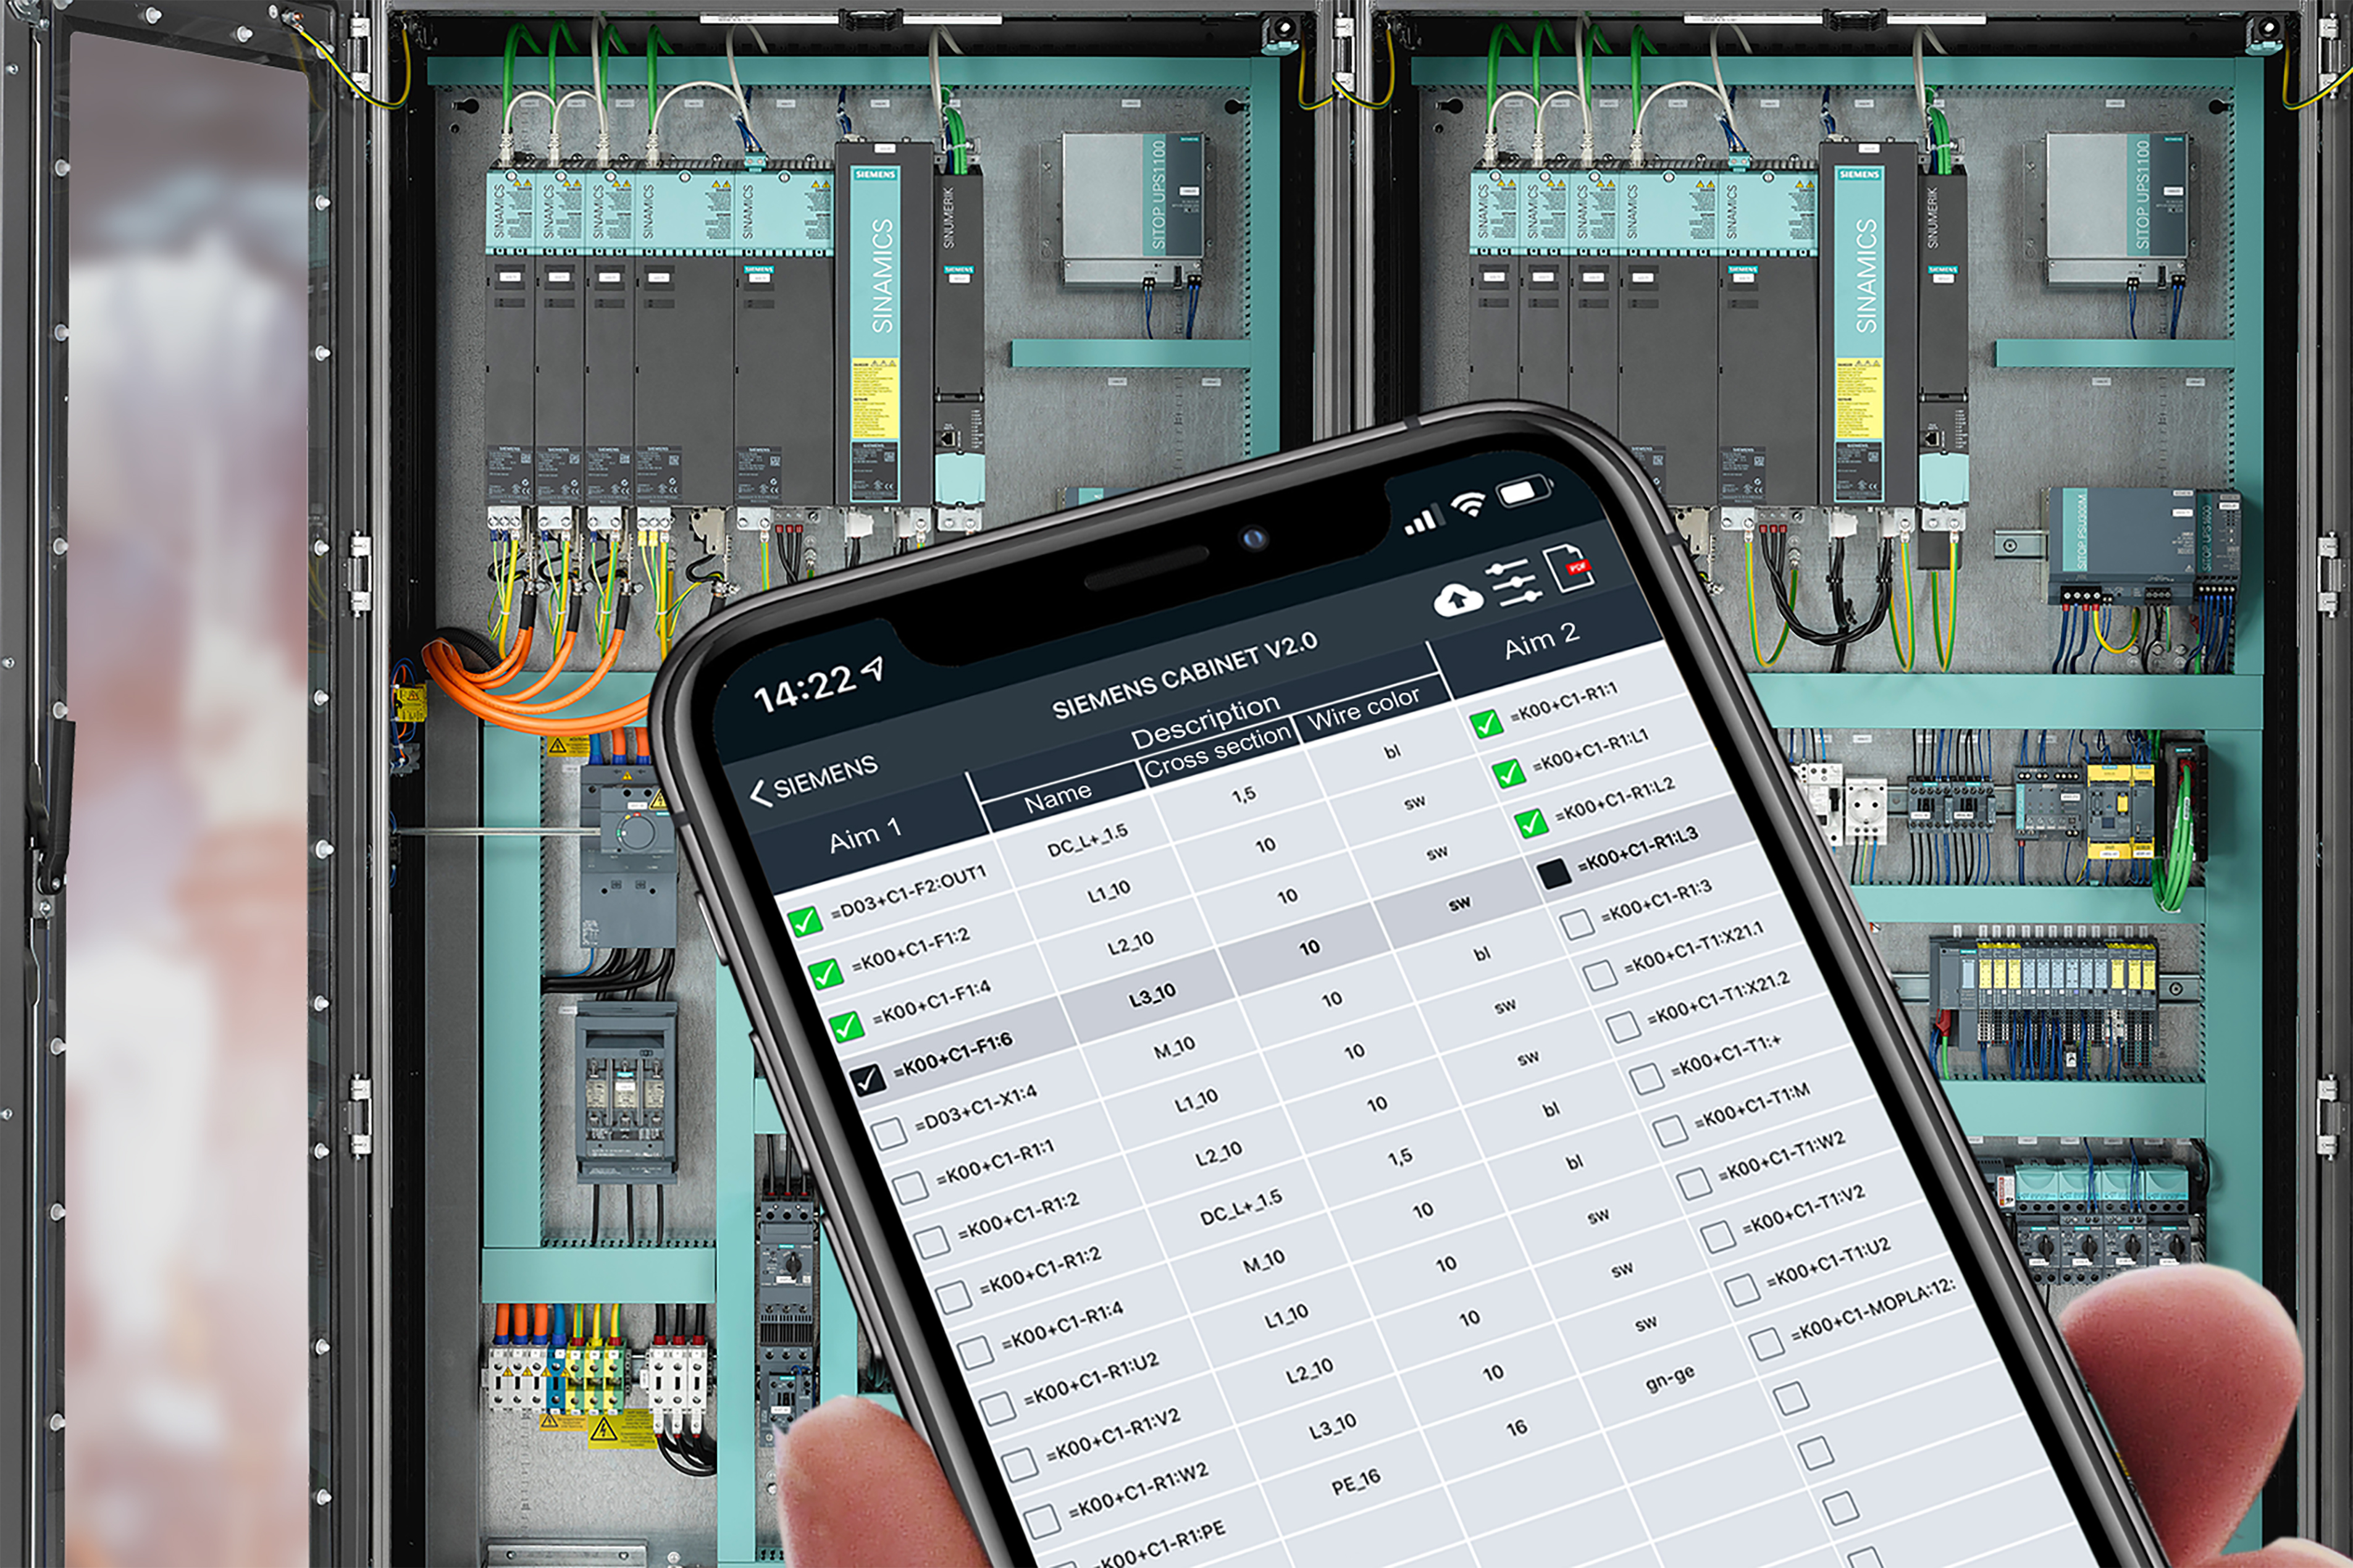 The app-supported wiring of control cabinets is much faster and more convenient than the traditional paper lists and circuit diagrams.